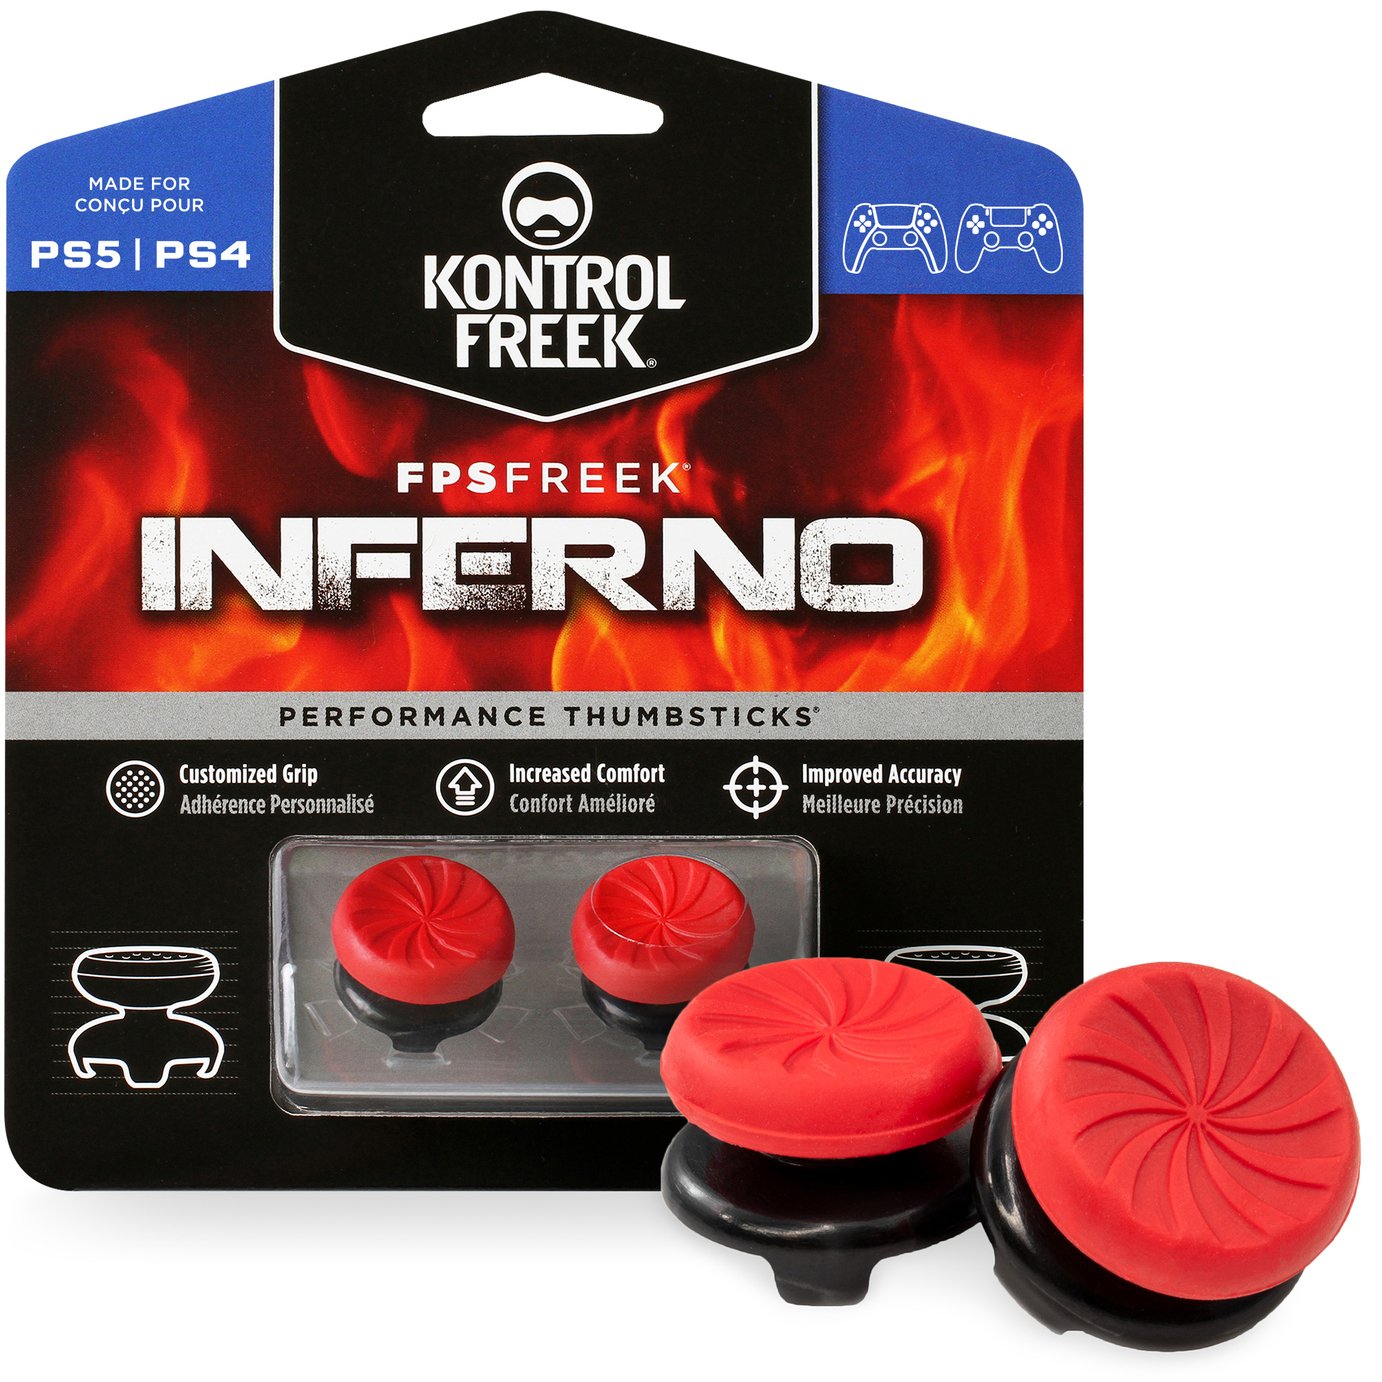 FPS Freek Inferno PS4 Controller Thumbsticks Review